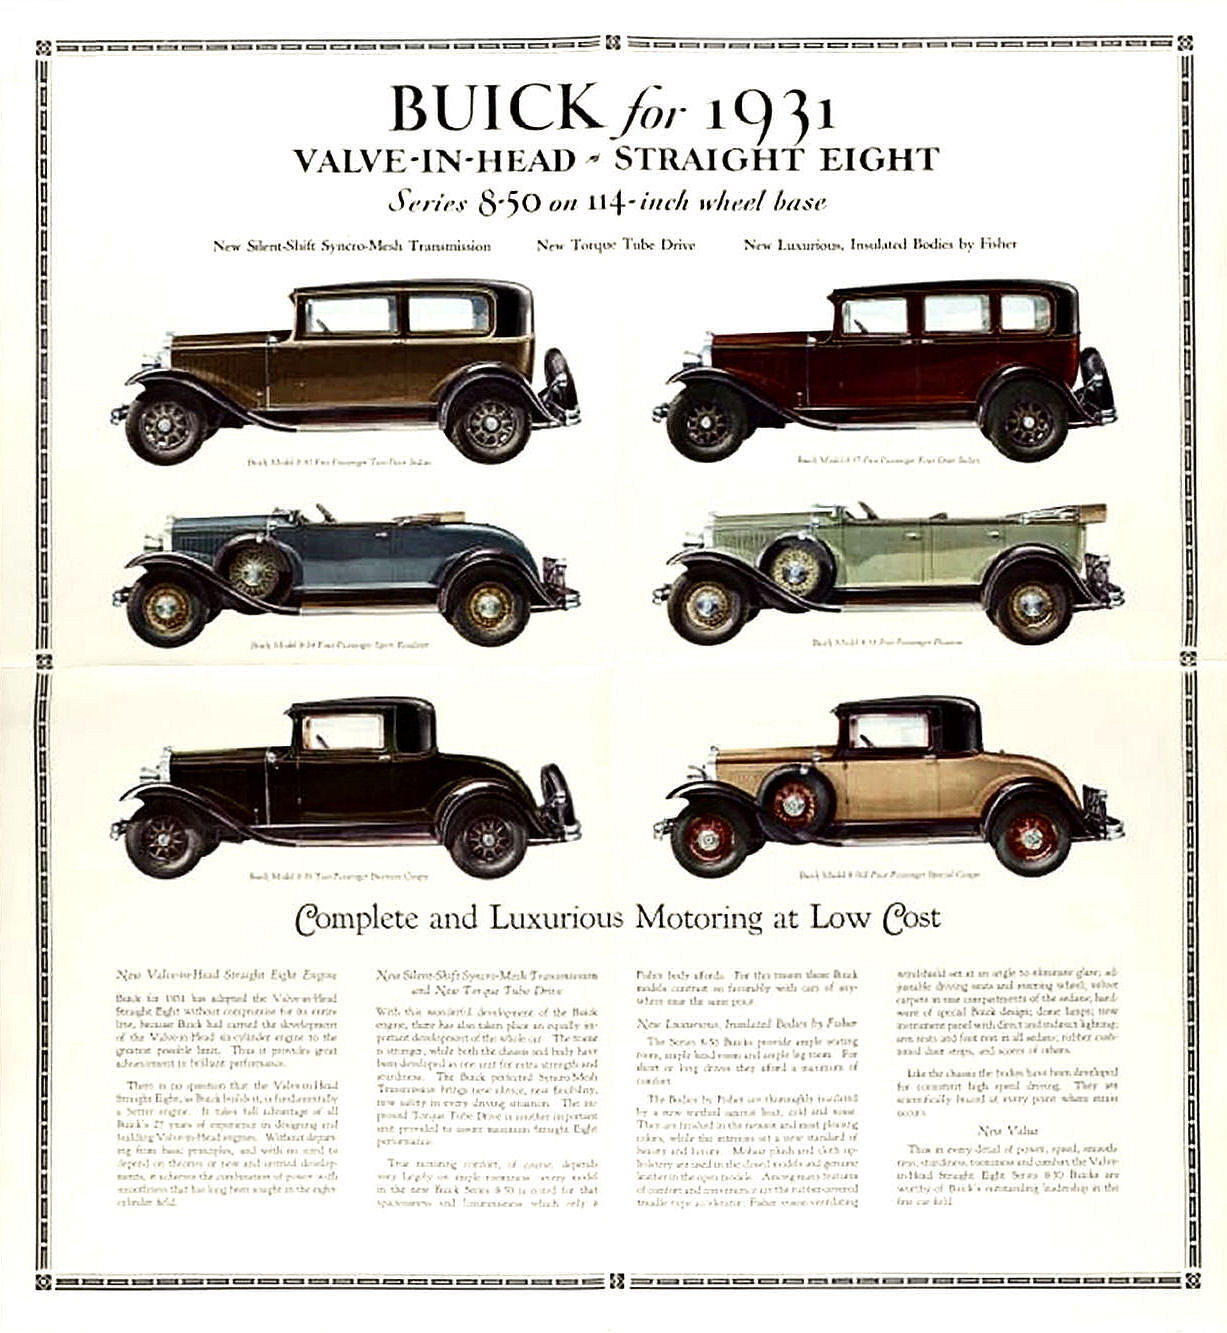 1931 Buick Foldout-05 to 08